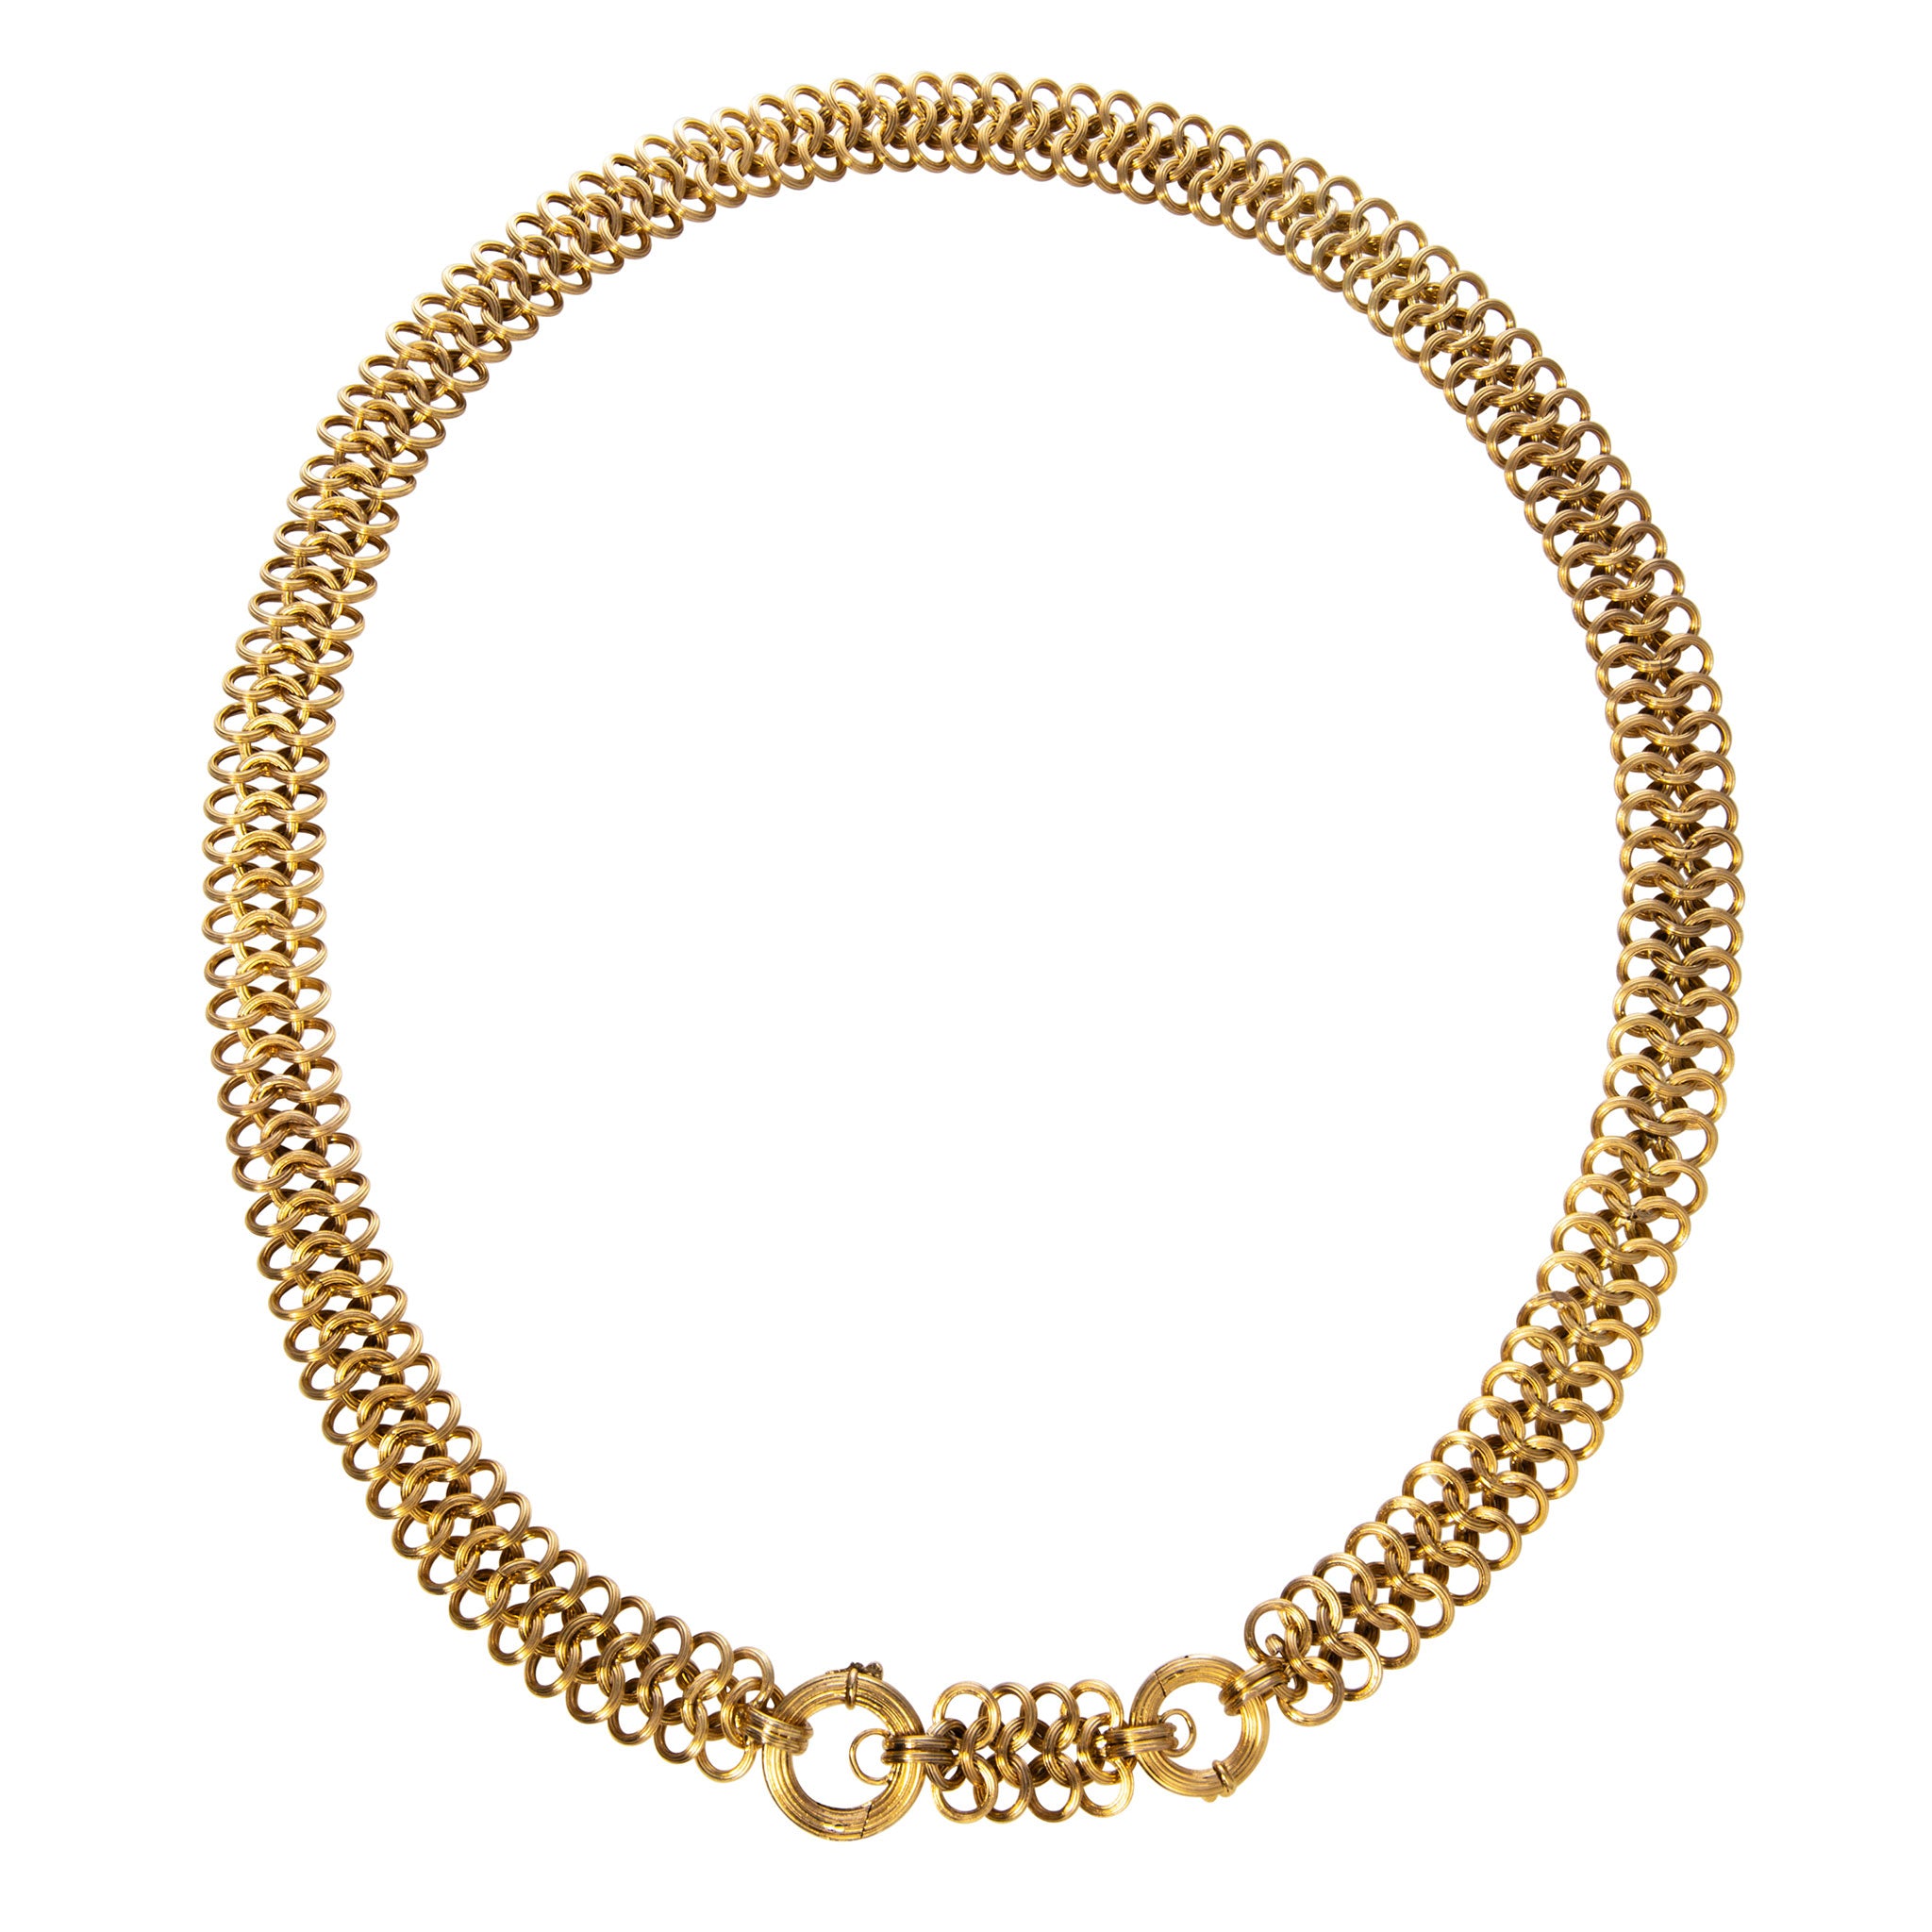 Victorian 14K Gold Triple Circle Link Chain Necklace